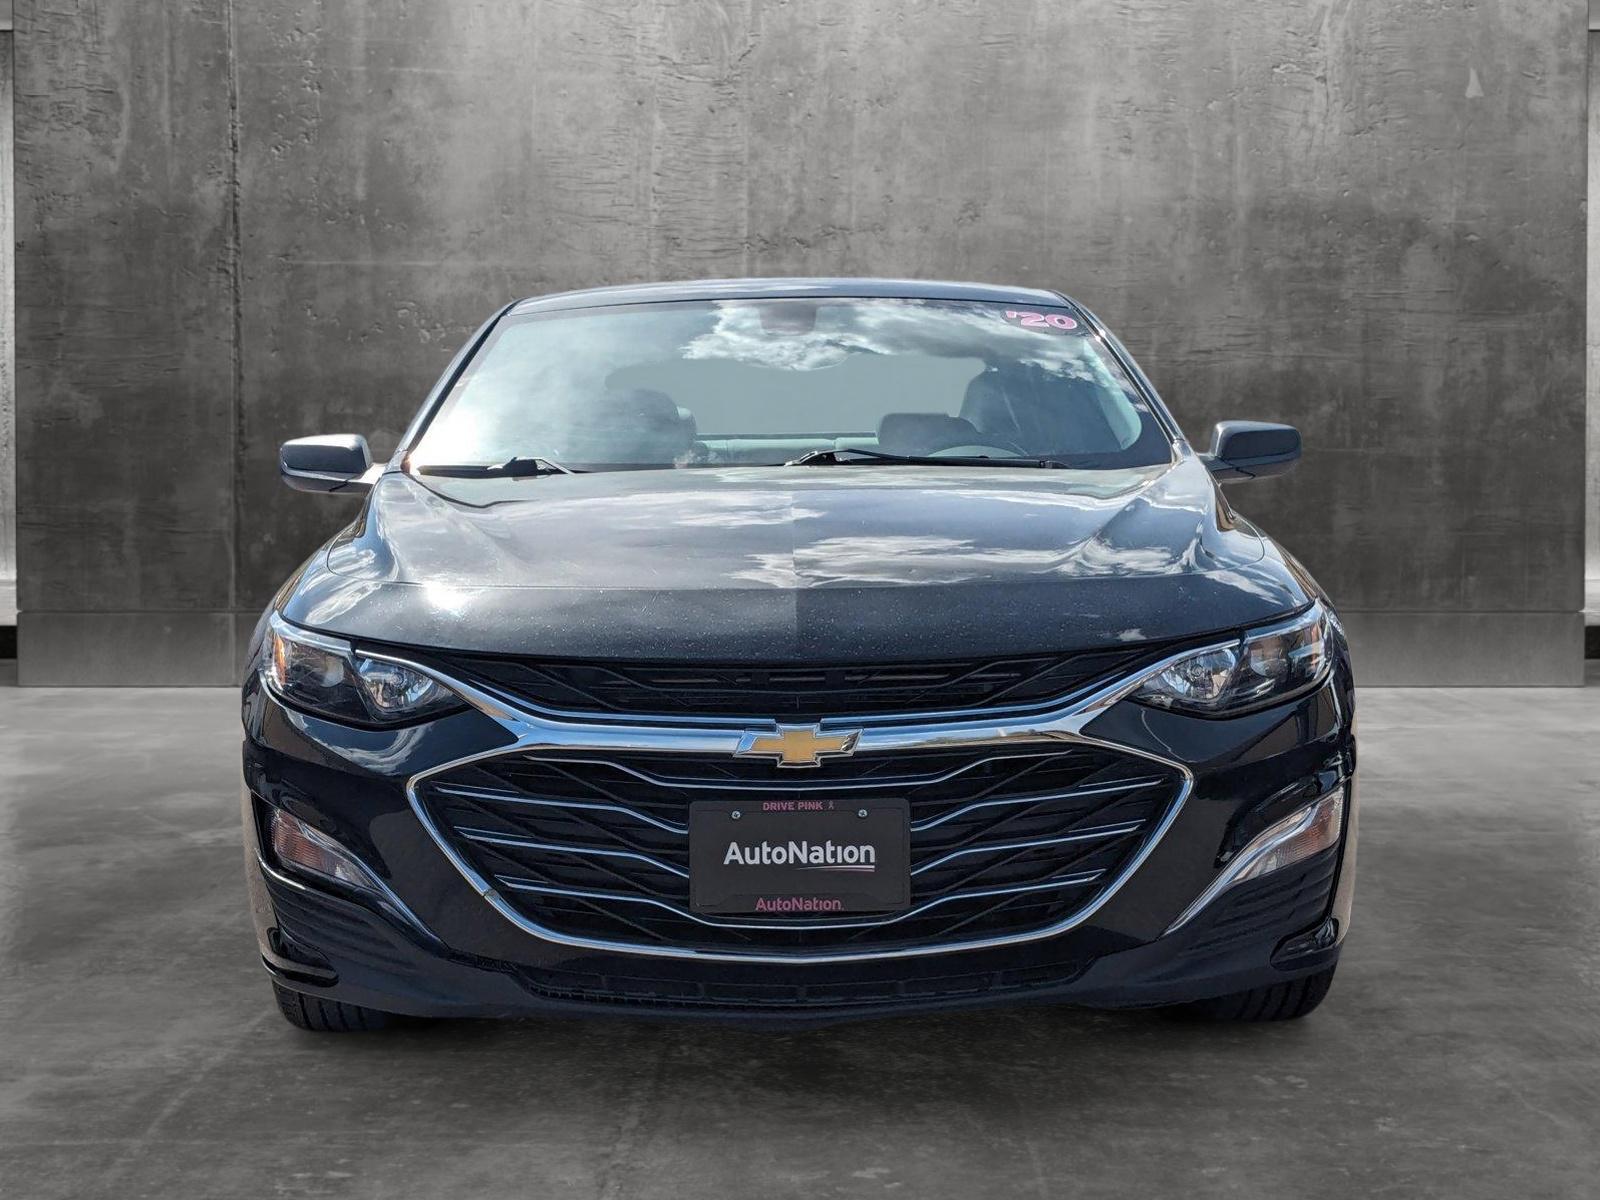 Used 2020 Chevrolet Malibu 1LS with VIN 1G1ZB5ST0LF127699 for sale in Lone Tree, CO